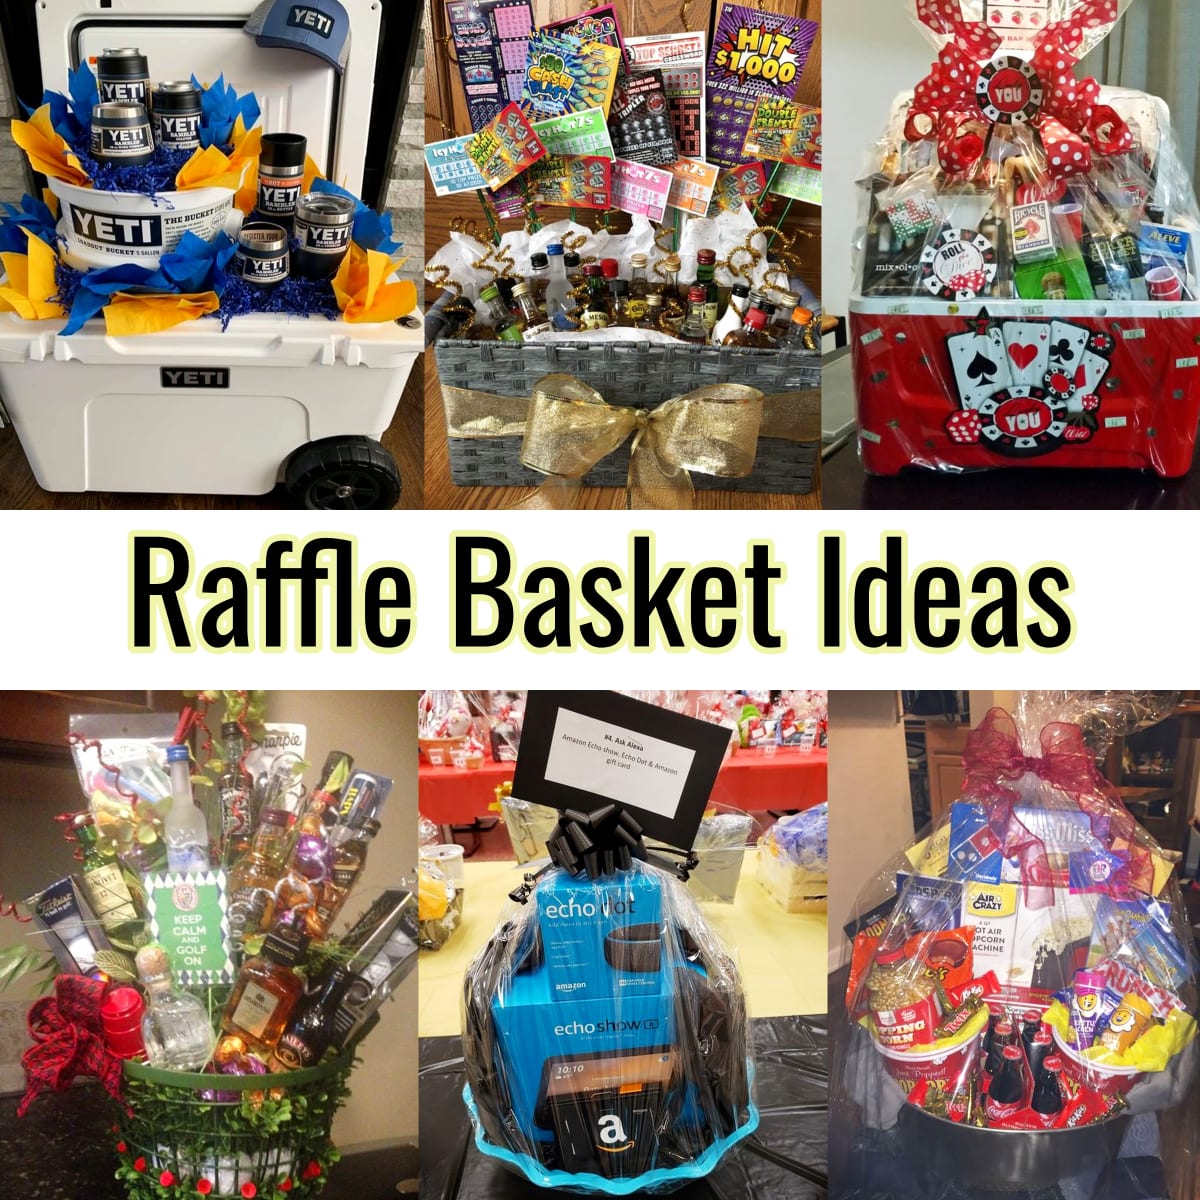 raffle basket ideas for fundraiser, benefits, adult silent auctions at school, church or work and other charity event